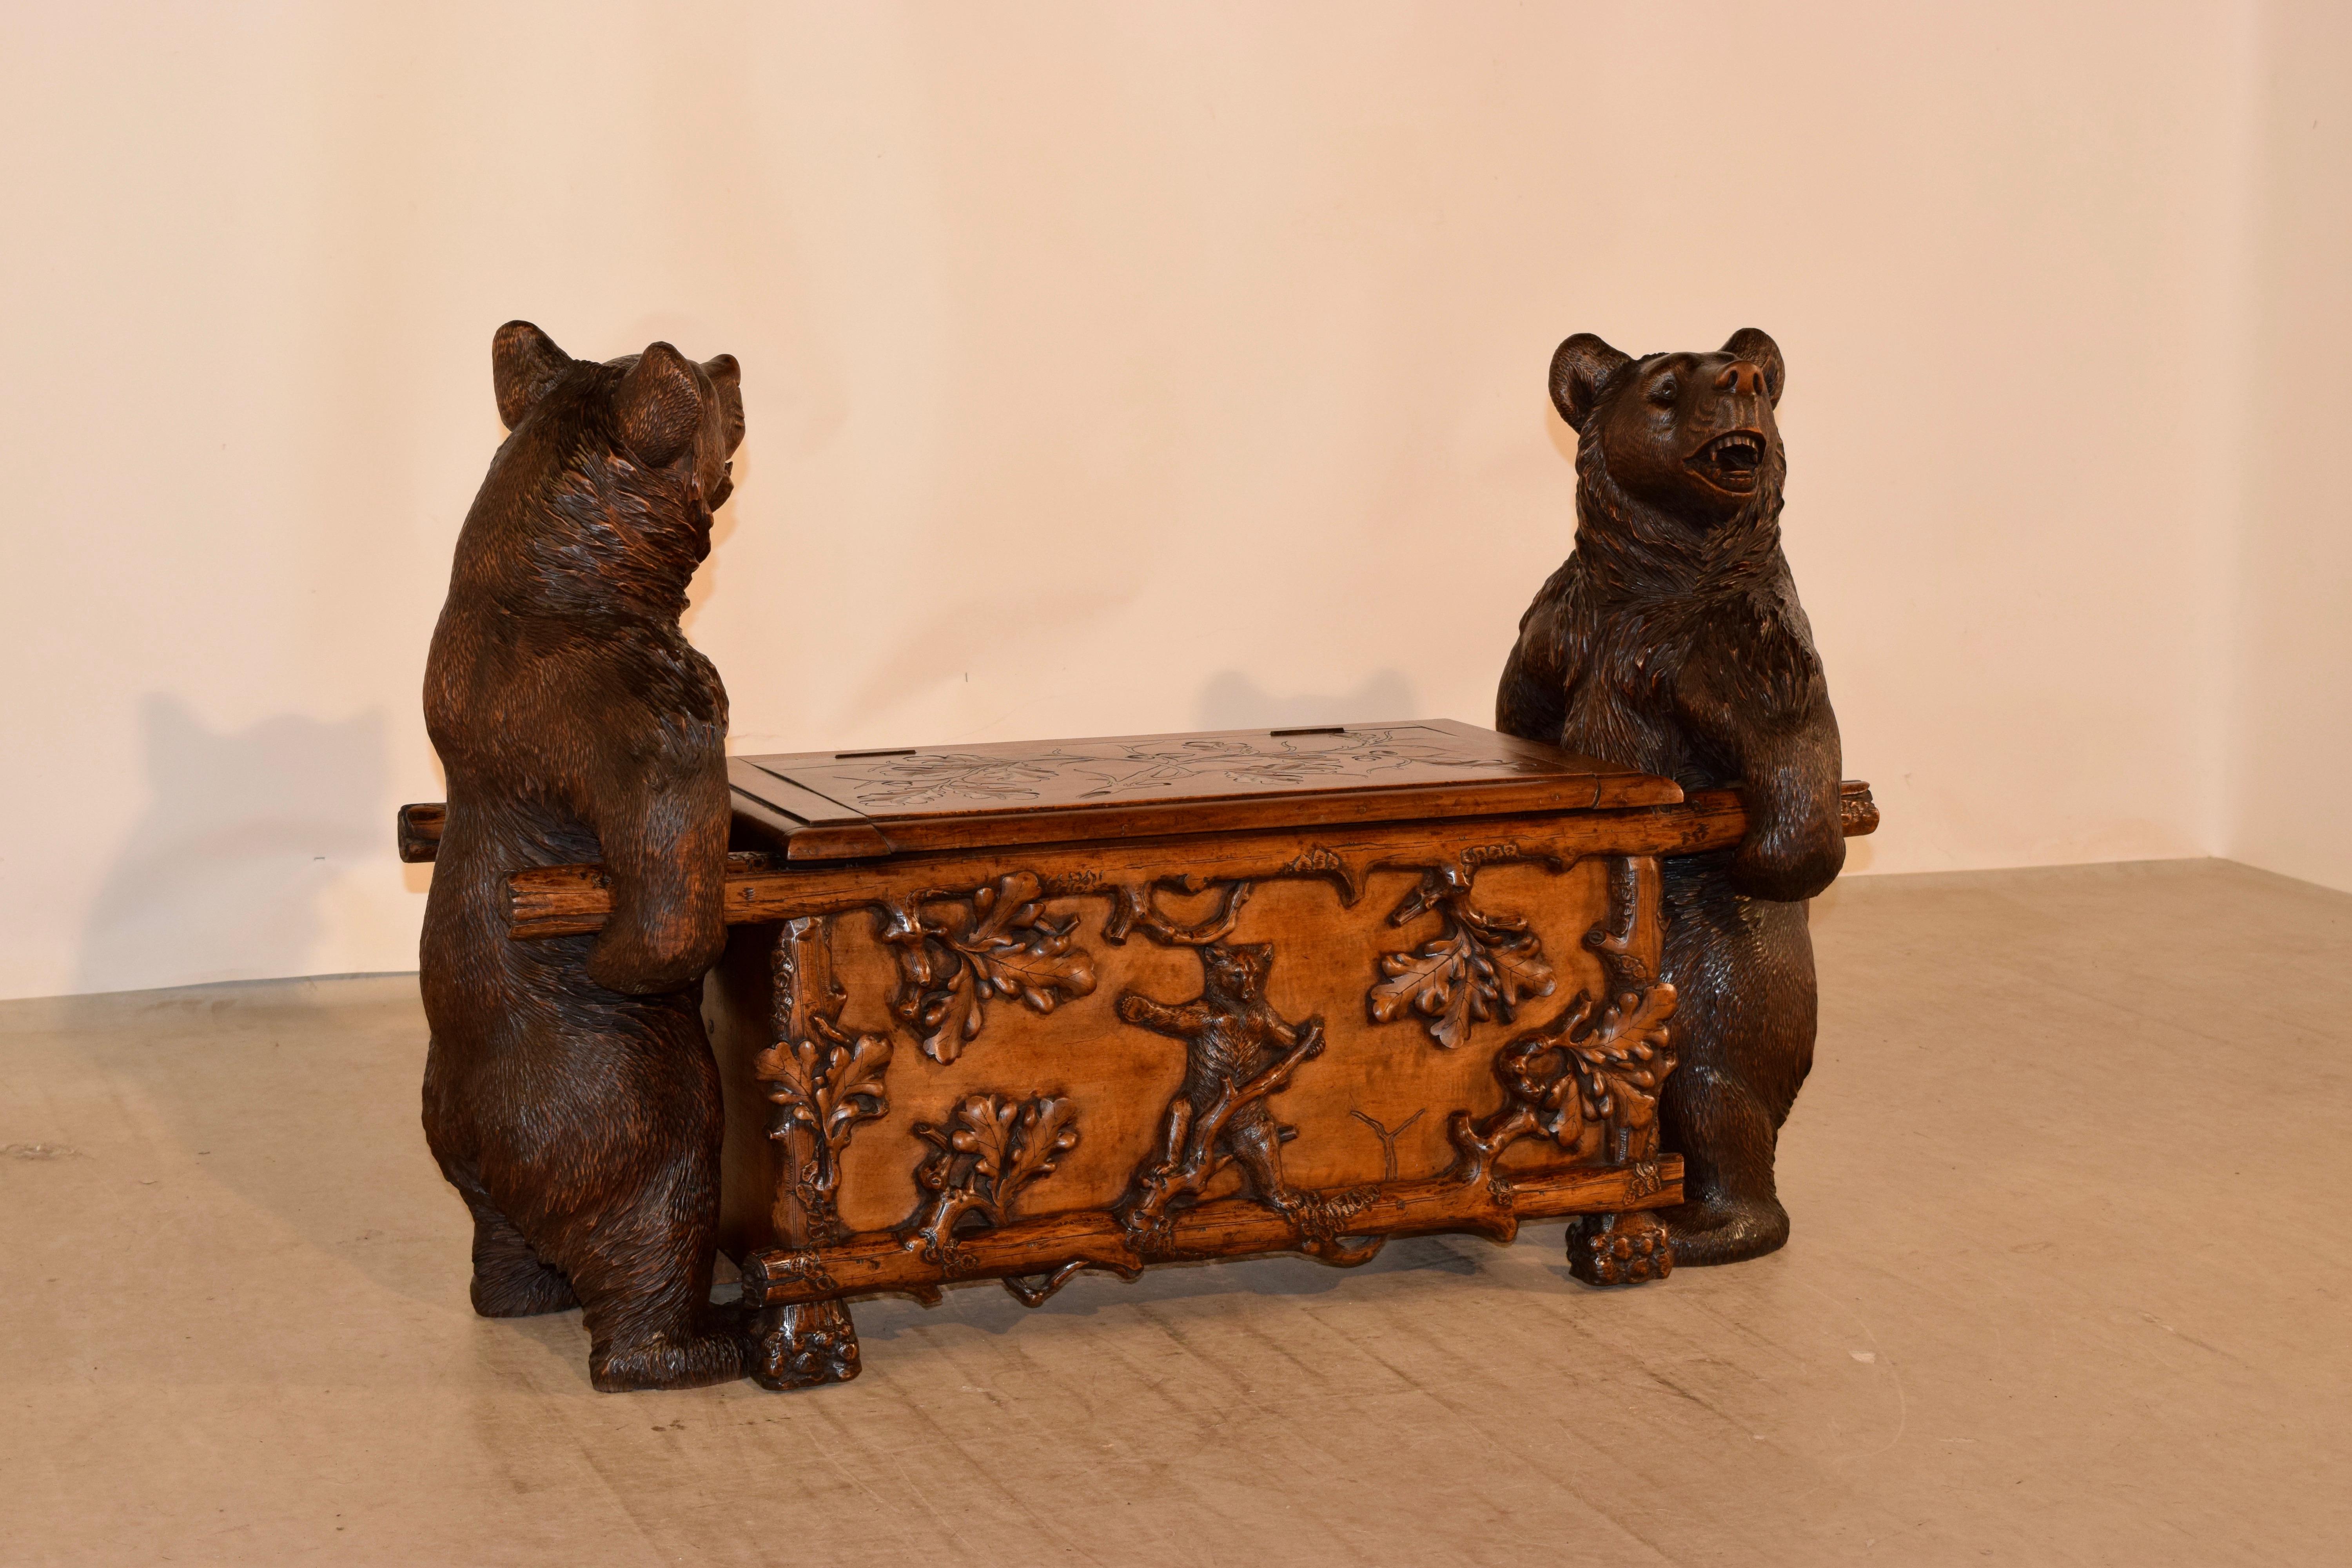 An excellent example of a 19th century Black Forest carved wooden bear bench from Switzerland made from linden wood. The bench having highly detailed hand carved bears at either end standing on their hind legs and holding the handles of the bench